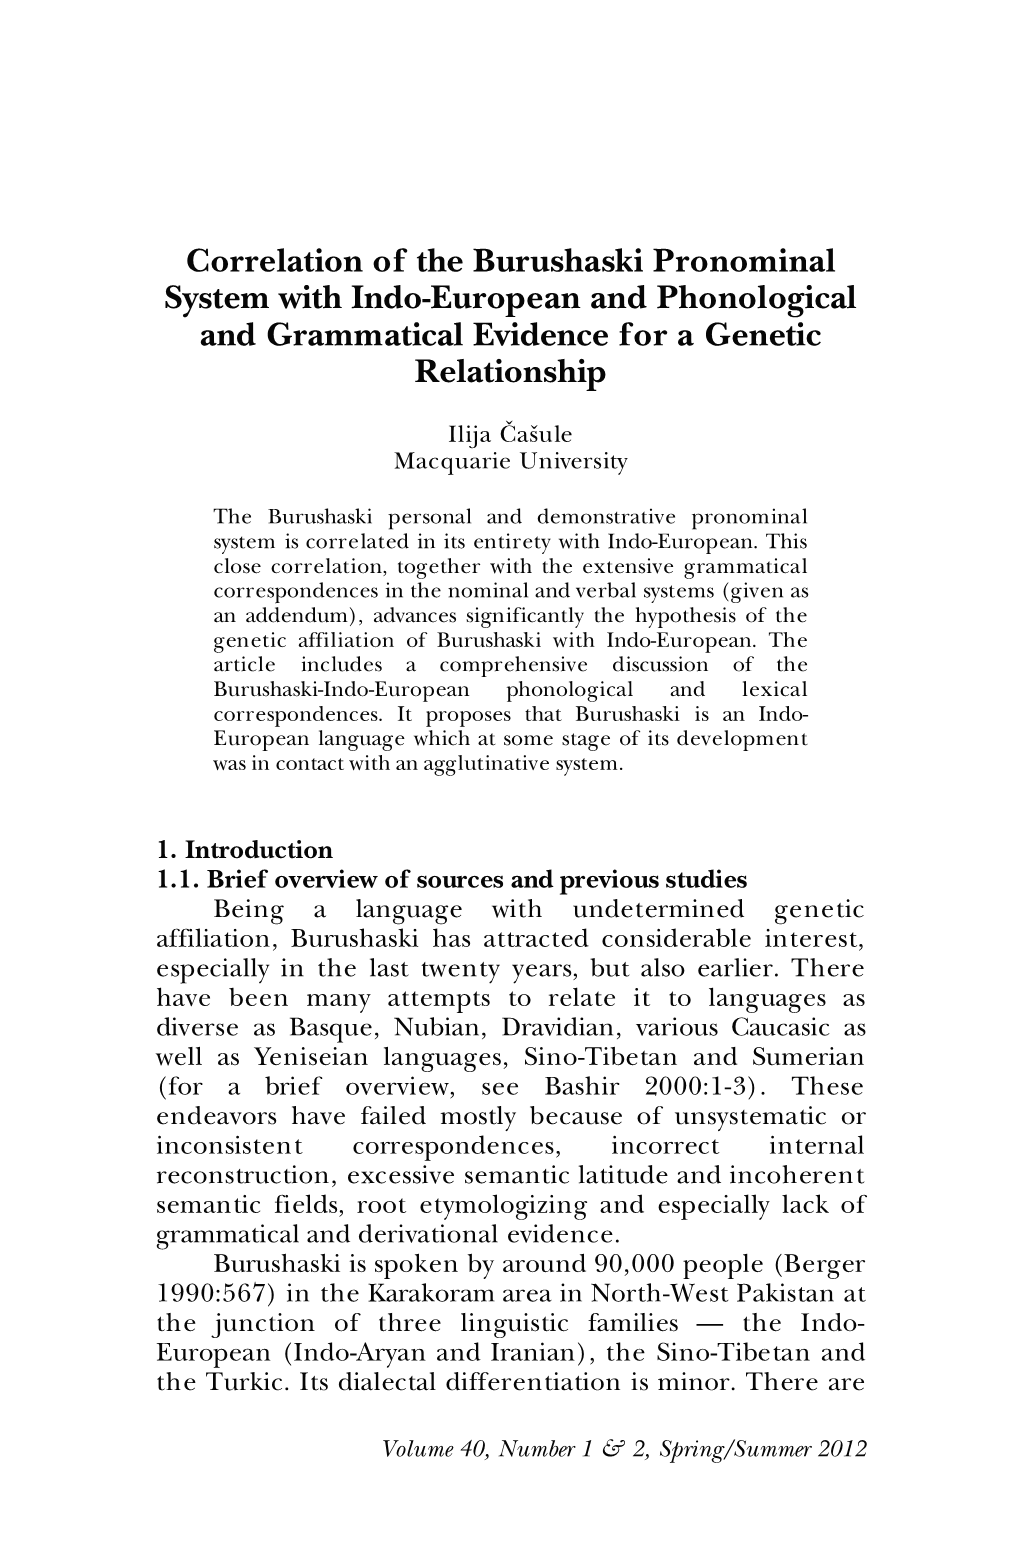 Correlation of the Burushaski Pronominal System with Indo-European and Phonological and Grammatical Evidence for a Genetic Relationship